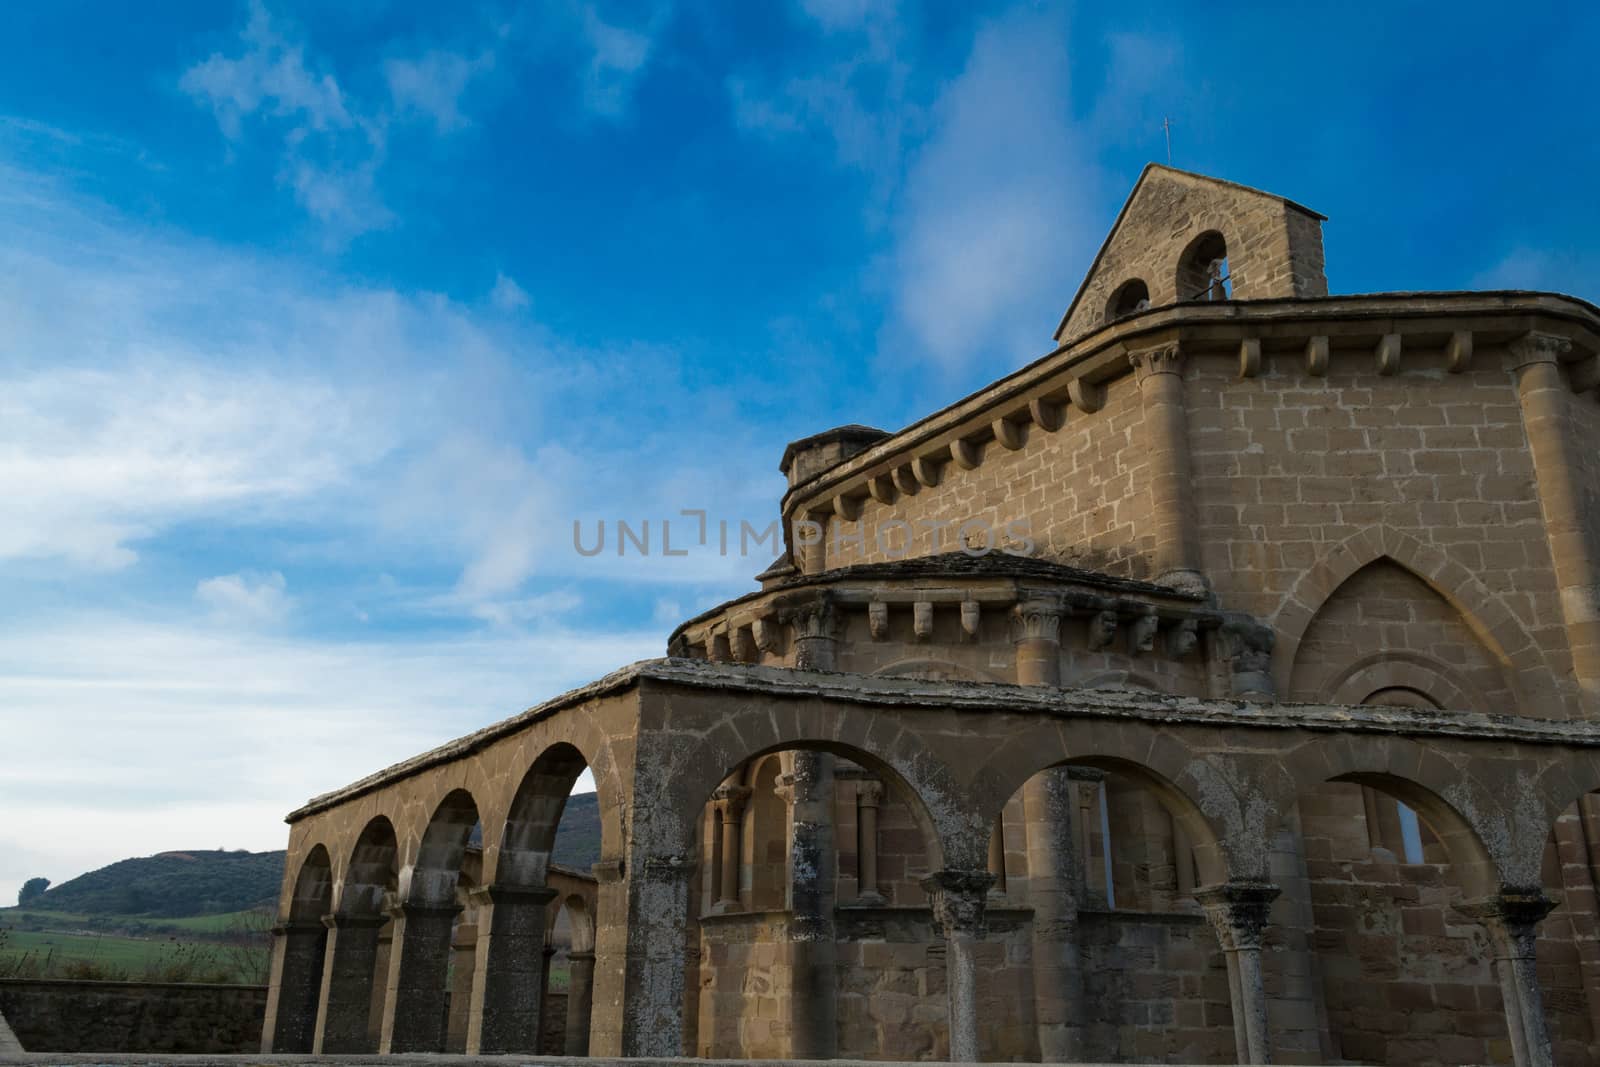 12th century Romanesque church located in the North of Spain which origin remains controversial.